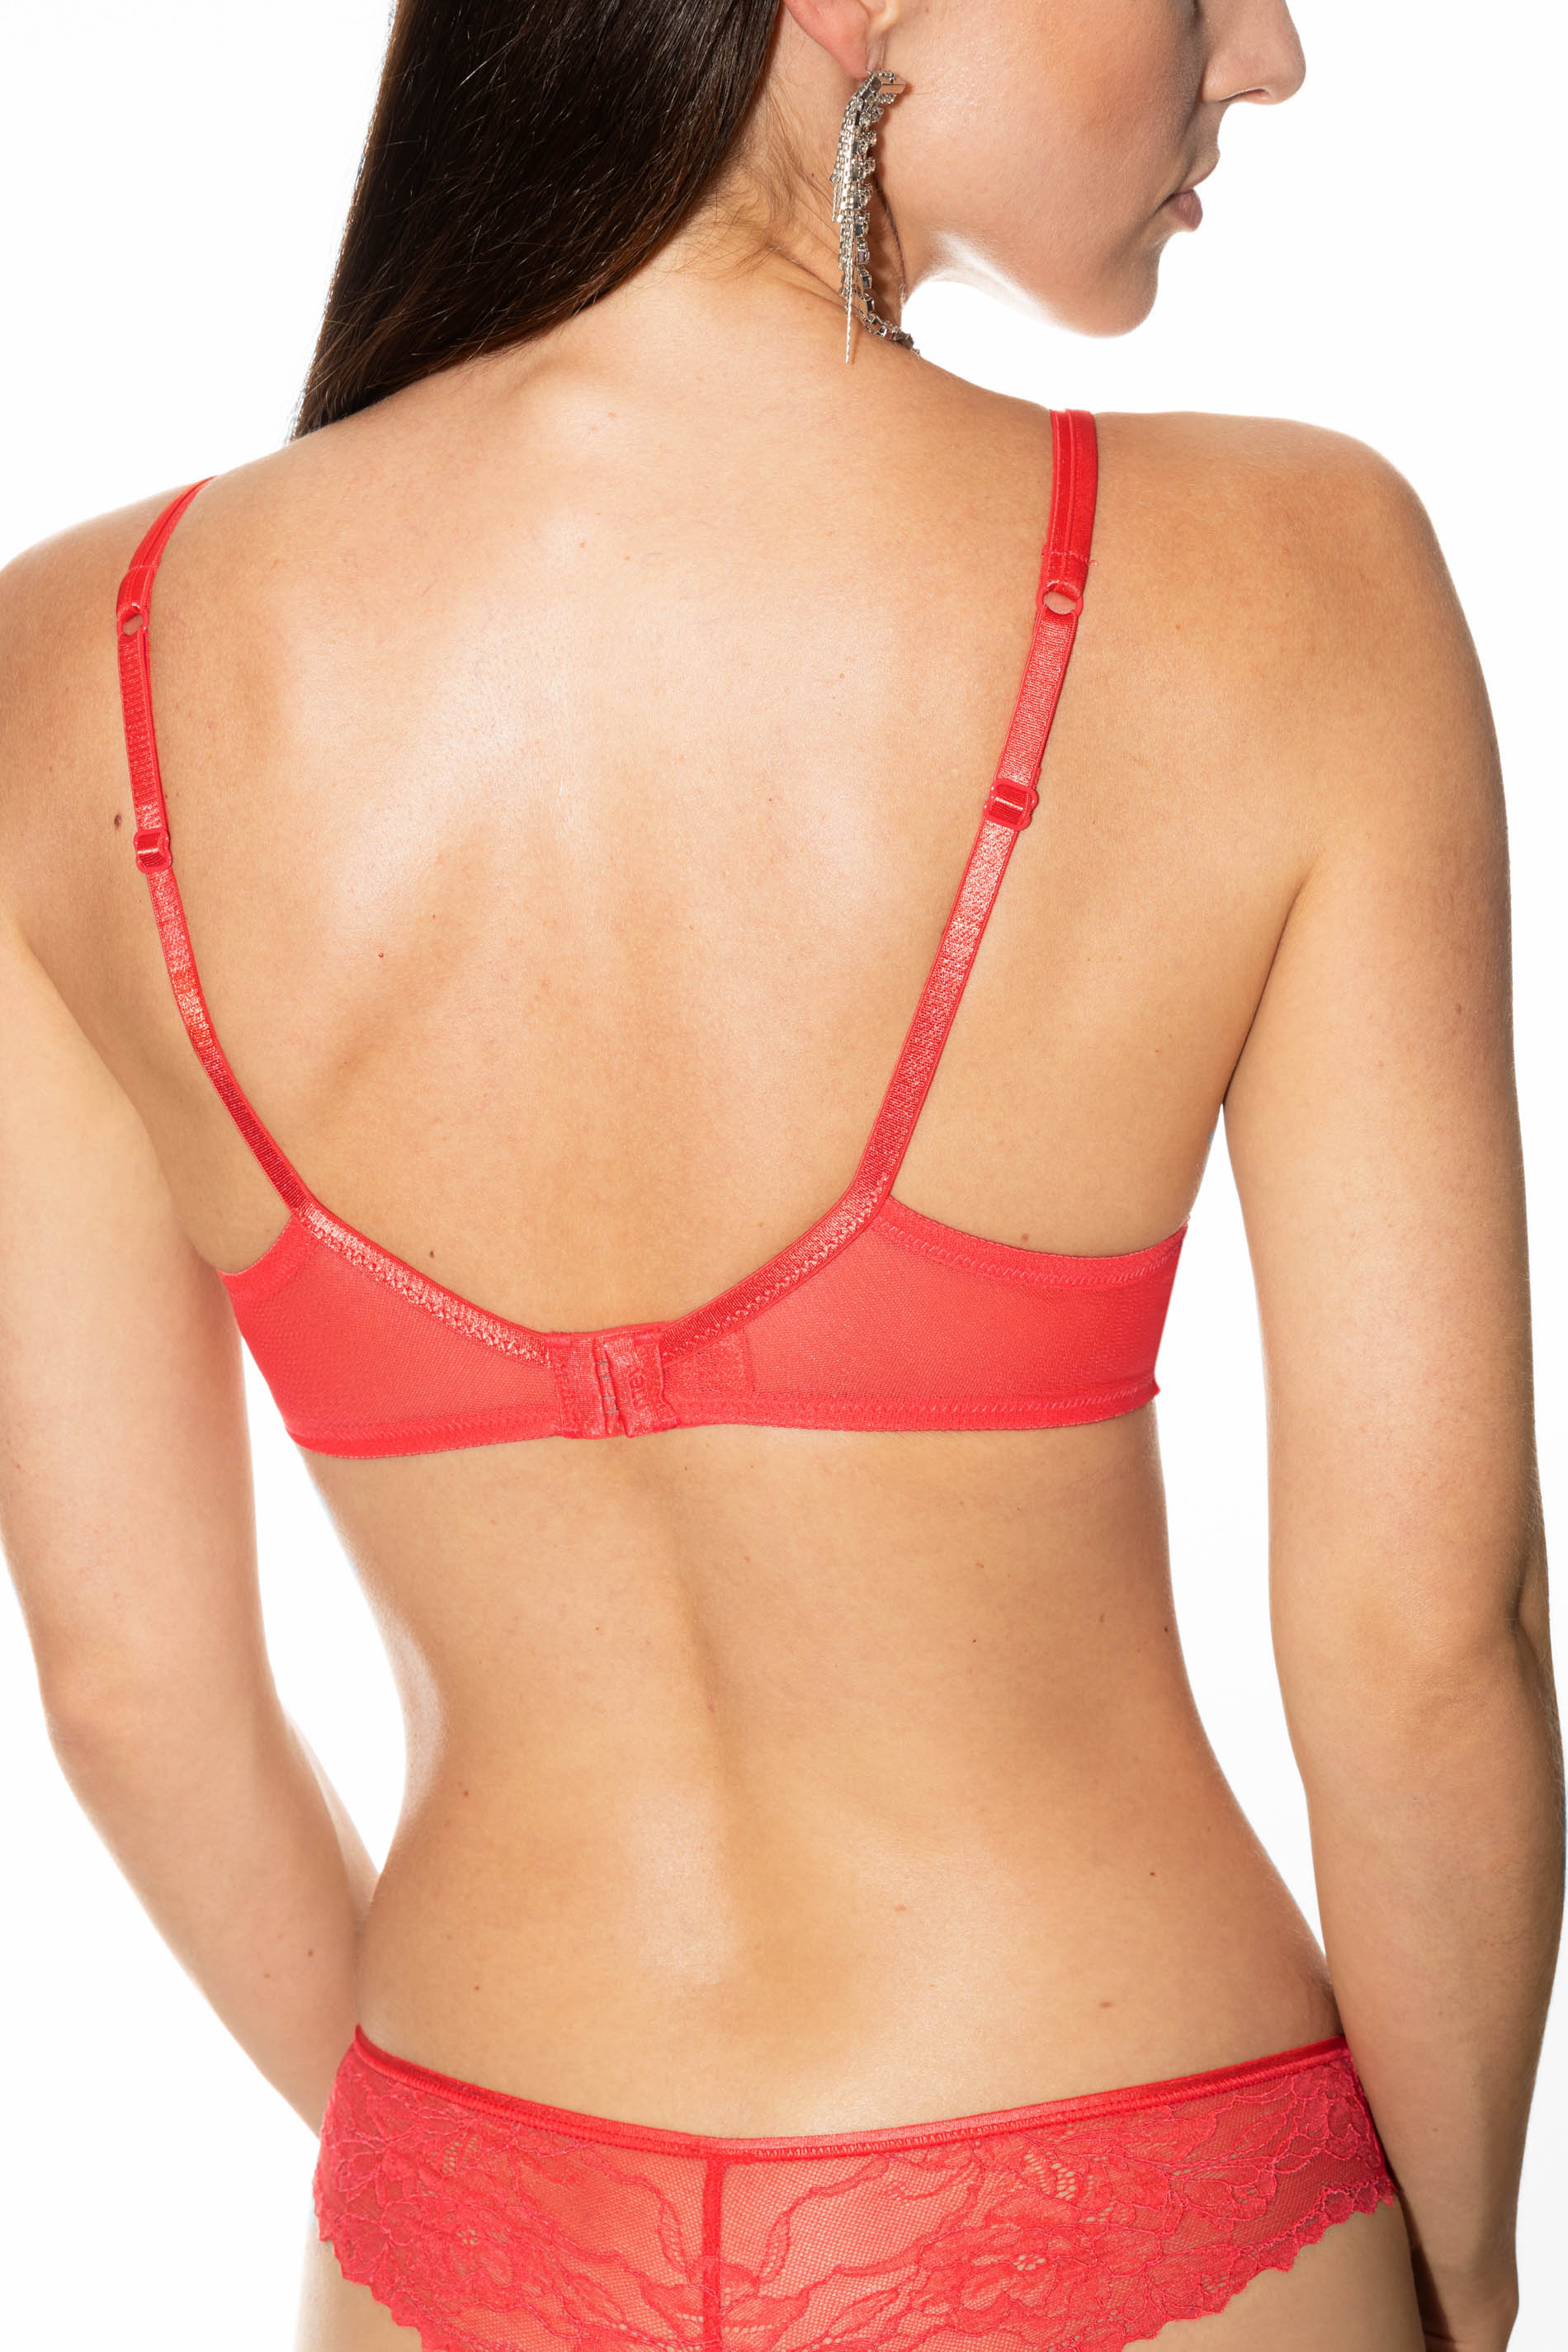 Spacer bra | Half Cup Serie Fabulous Detail View 02 | mey®